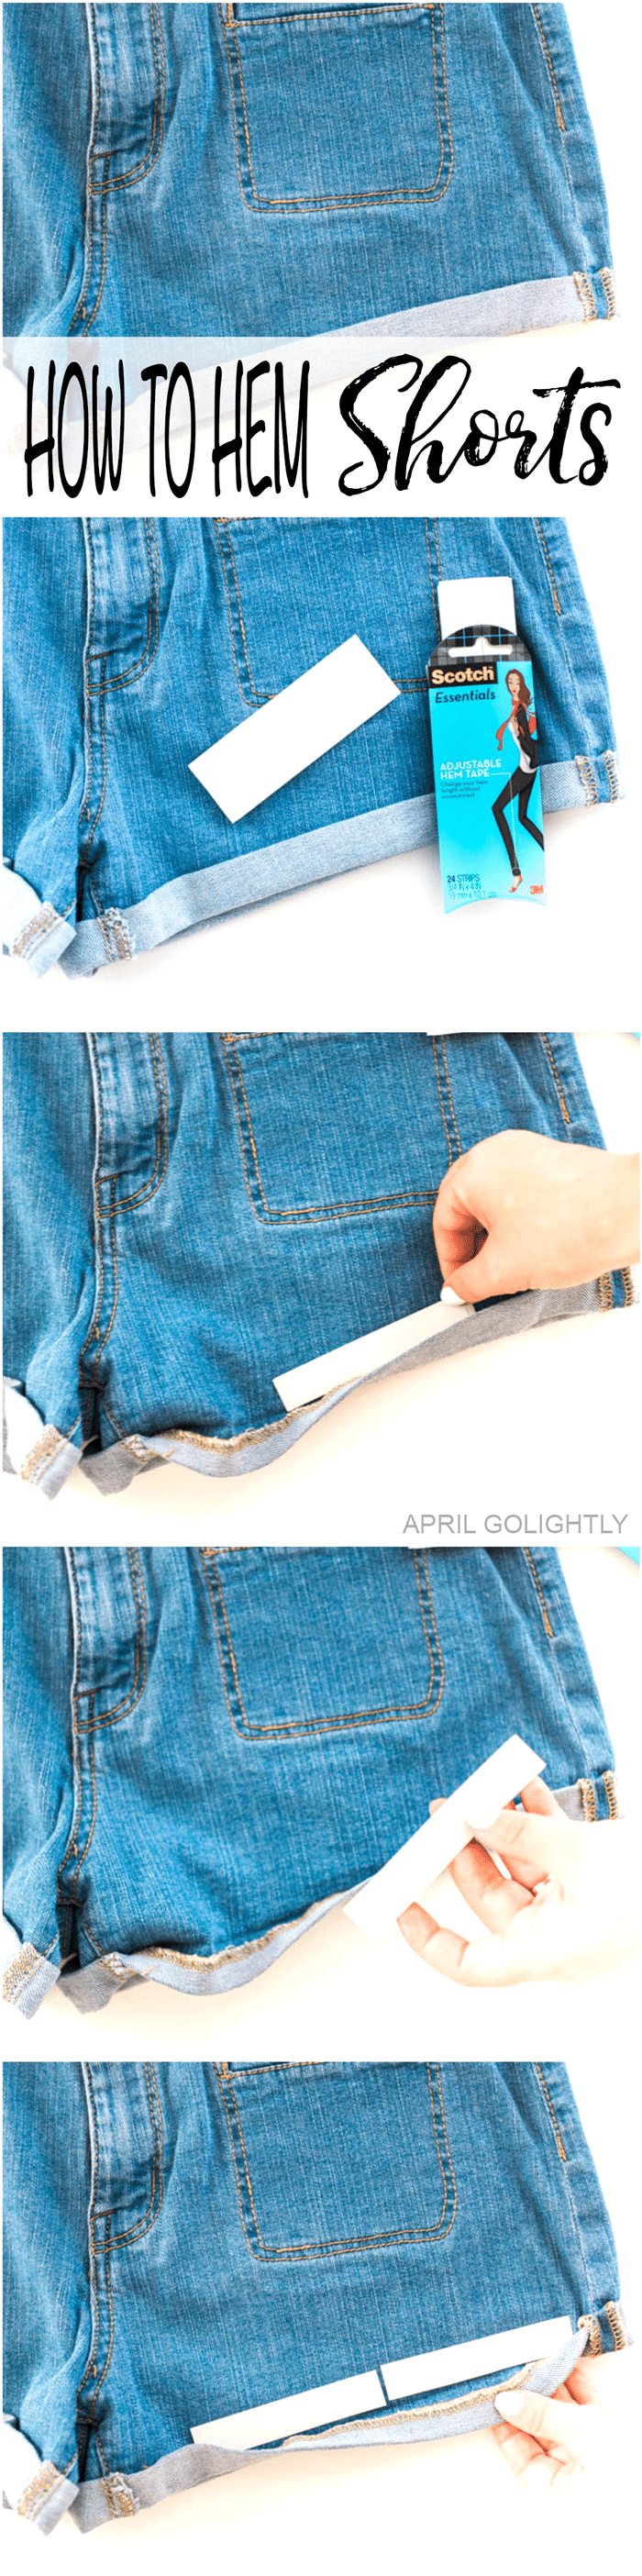 How to Hem Summer Shorts to the Length you Want - its easy to go from modest length to jean shorts with the help of Scotch™ Essentials Adjustable Hem Tape - easy DIY project 